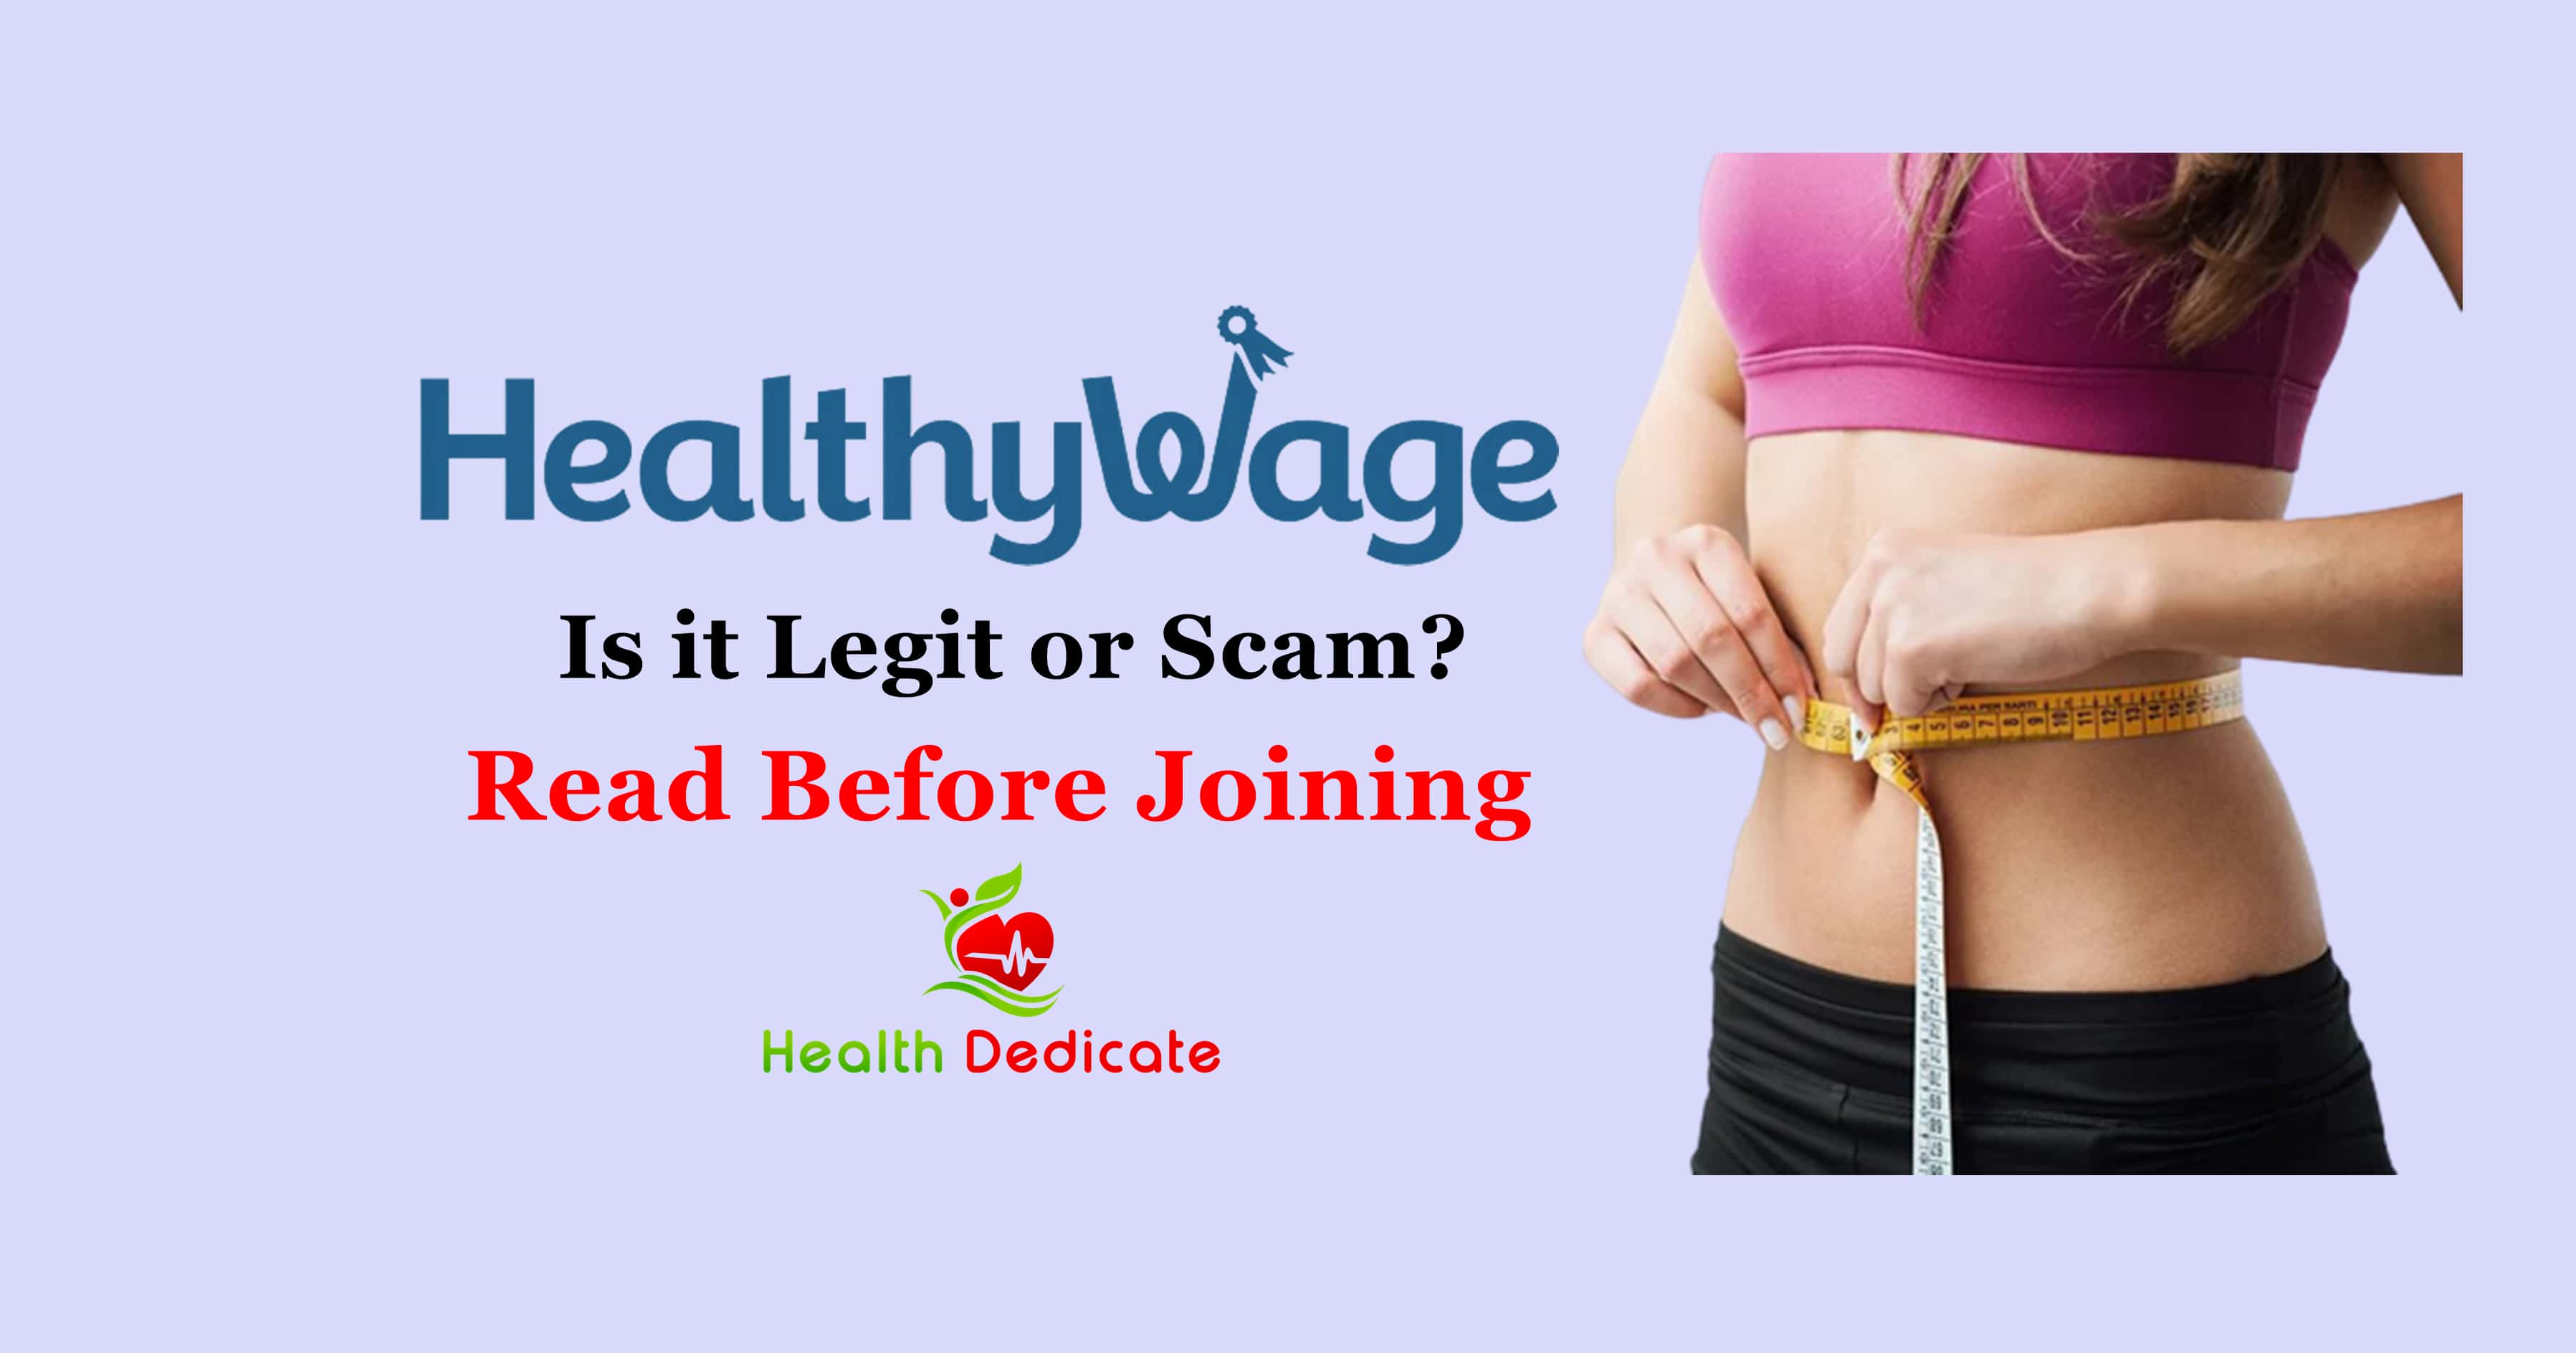 Healthywage Review, Healthywage Review - Is it Legit or Scam? Read Before Joining